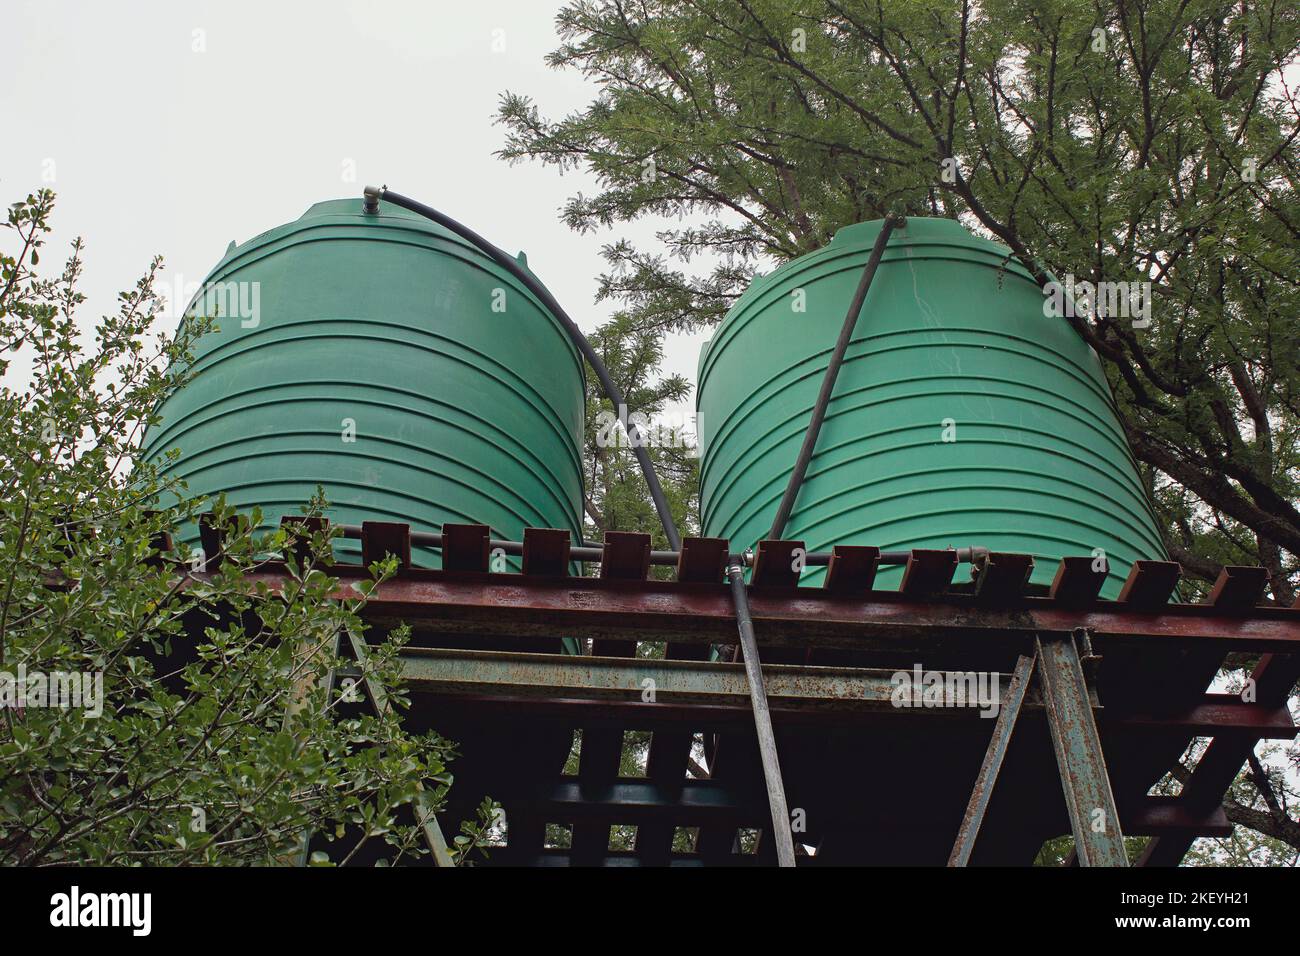 https://c8.alamy.com/comp/2KEYH21/two-big-green-plastic-water-storage-tanks-on-metal-stand-image-taken-from-below-feeder-pipes-visible-2KEYH21.jpg